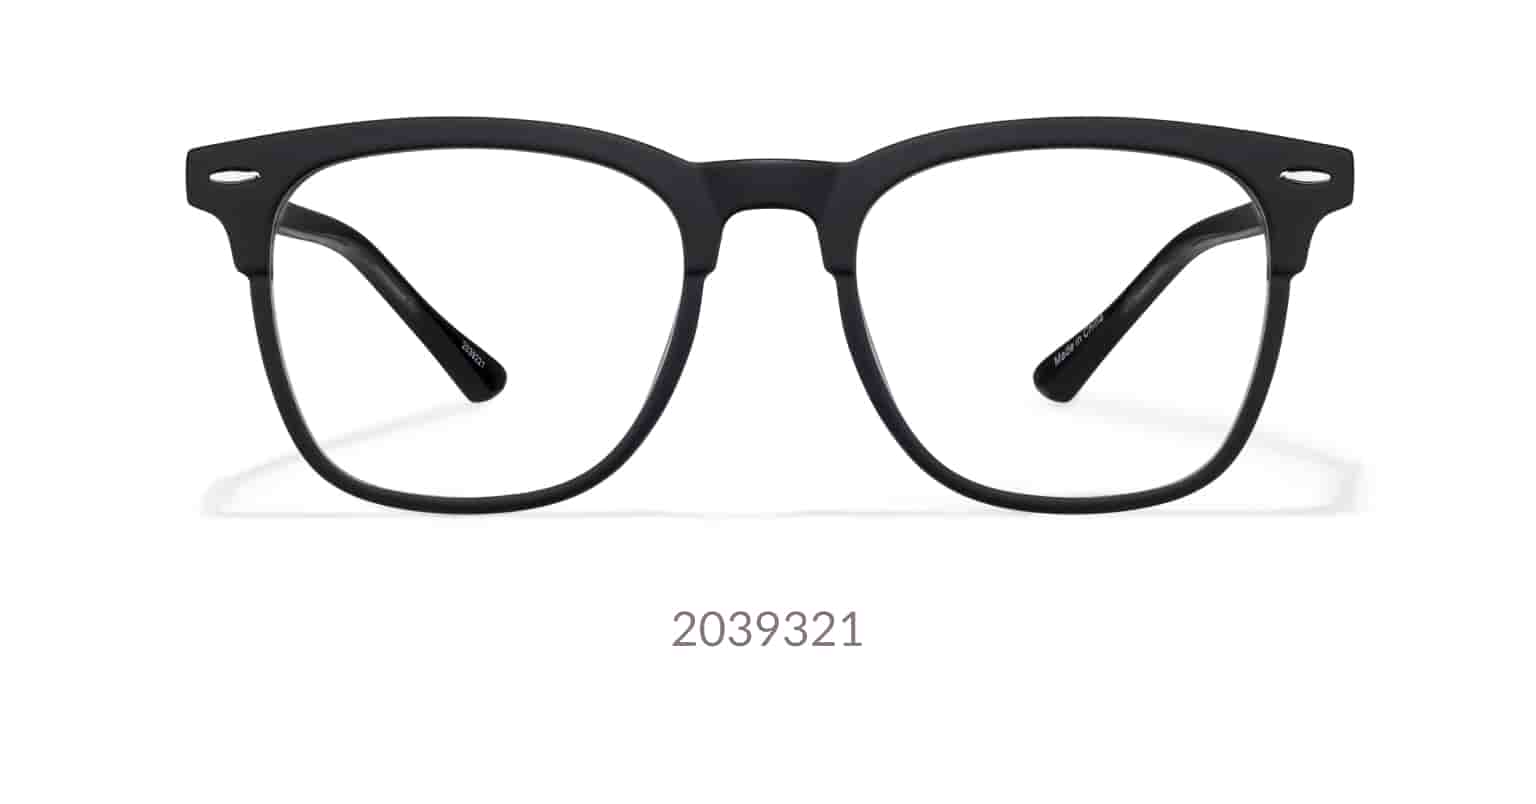 Image of zenni remakes bering browline glasses #2039321 against a white background.